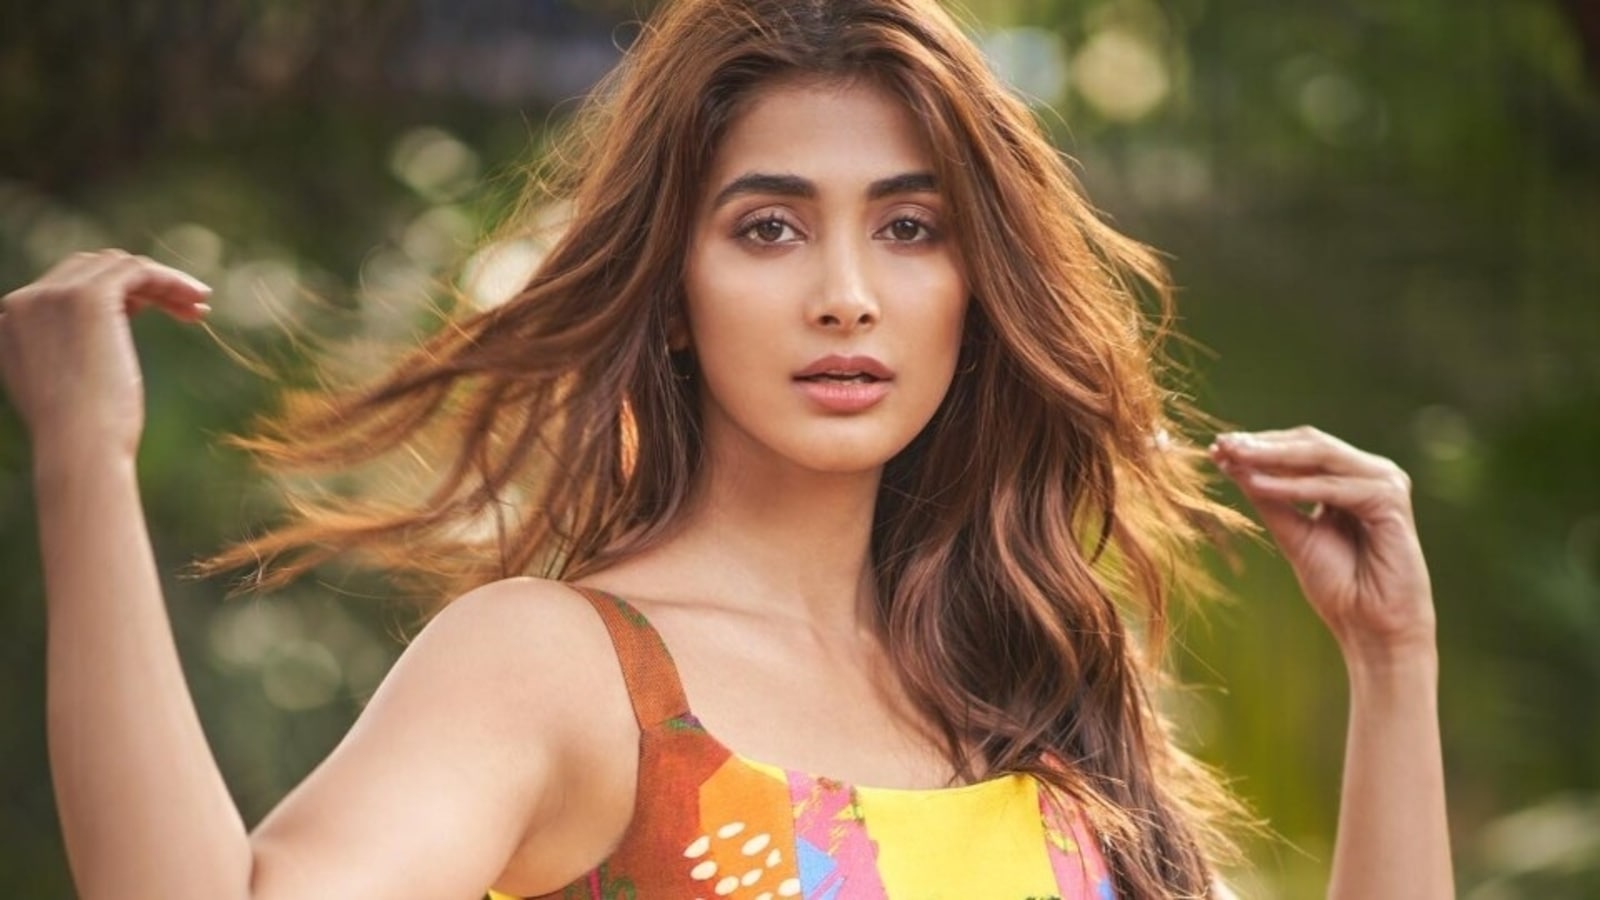 Pooja Sexy Rape Video - Pooja Hegde in colourful corset top and bodycon skirt is the queen of quirk  | Fashion Trends - Hindustan Times